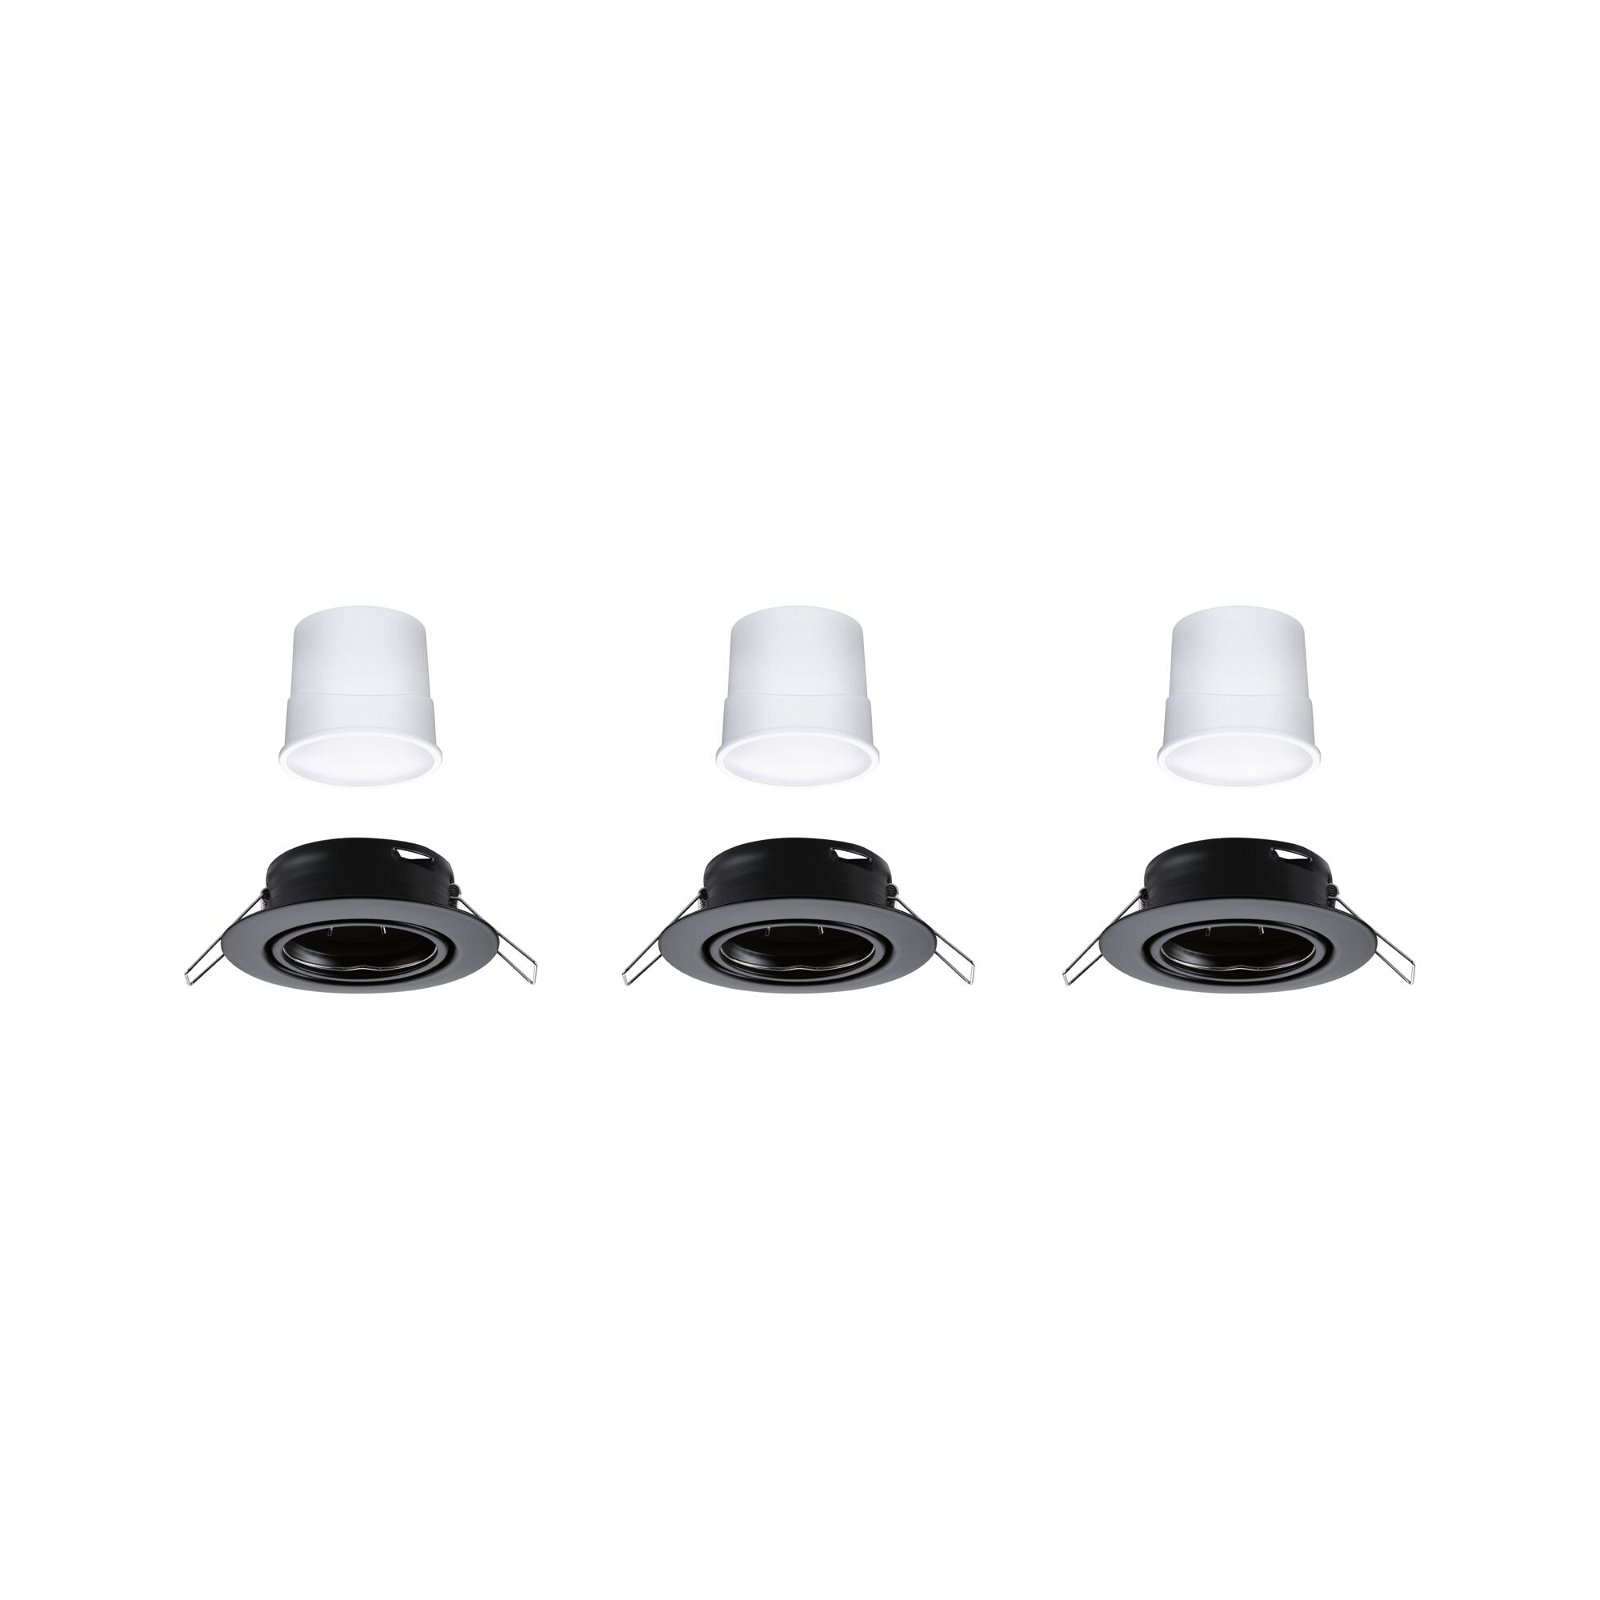 LED Recessed luminaire Smart Home Zigbee 3.0 Base Coin Basic Set Swivelling round 90mm 20° 3x4,9W 3x430lm 230V dimmable 3000K Black matt